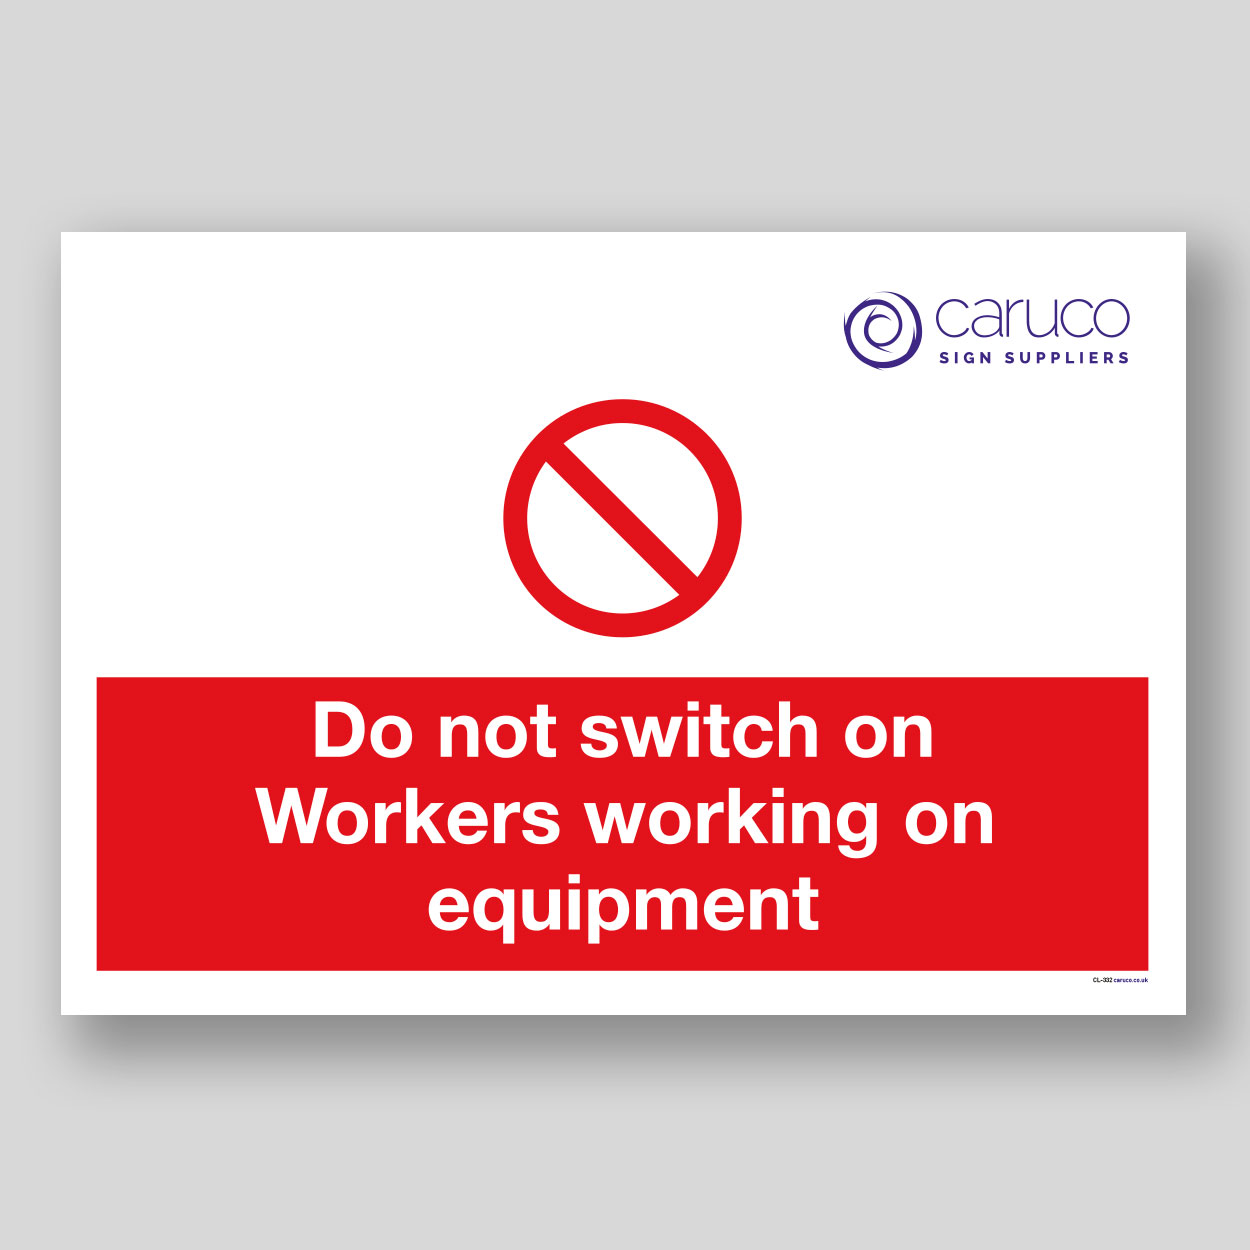 CL-332 Do not switch on working on equipment